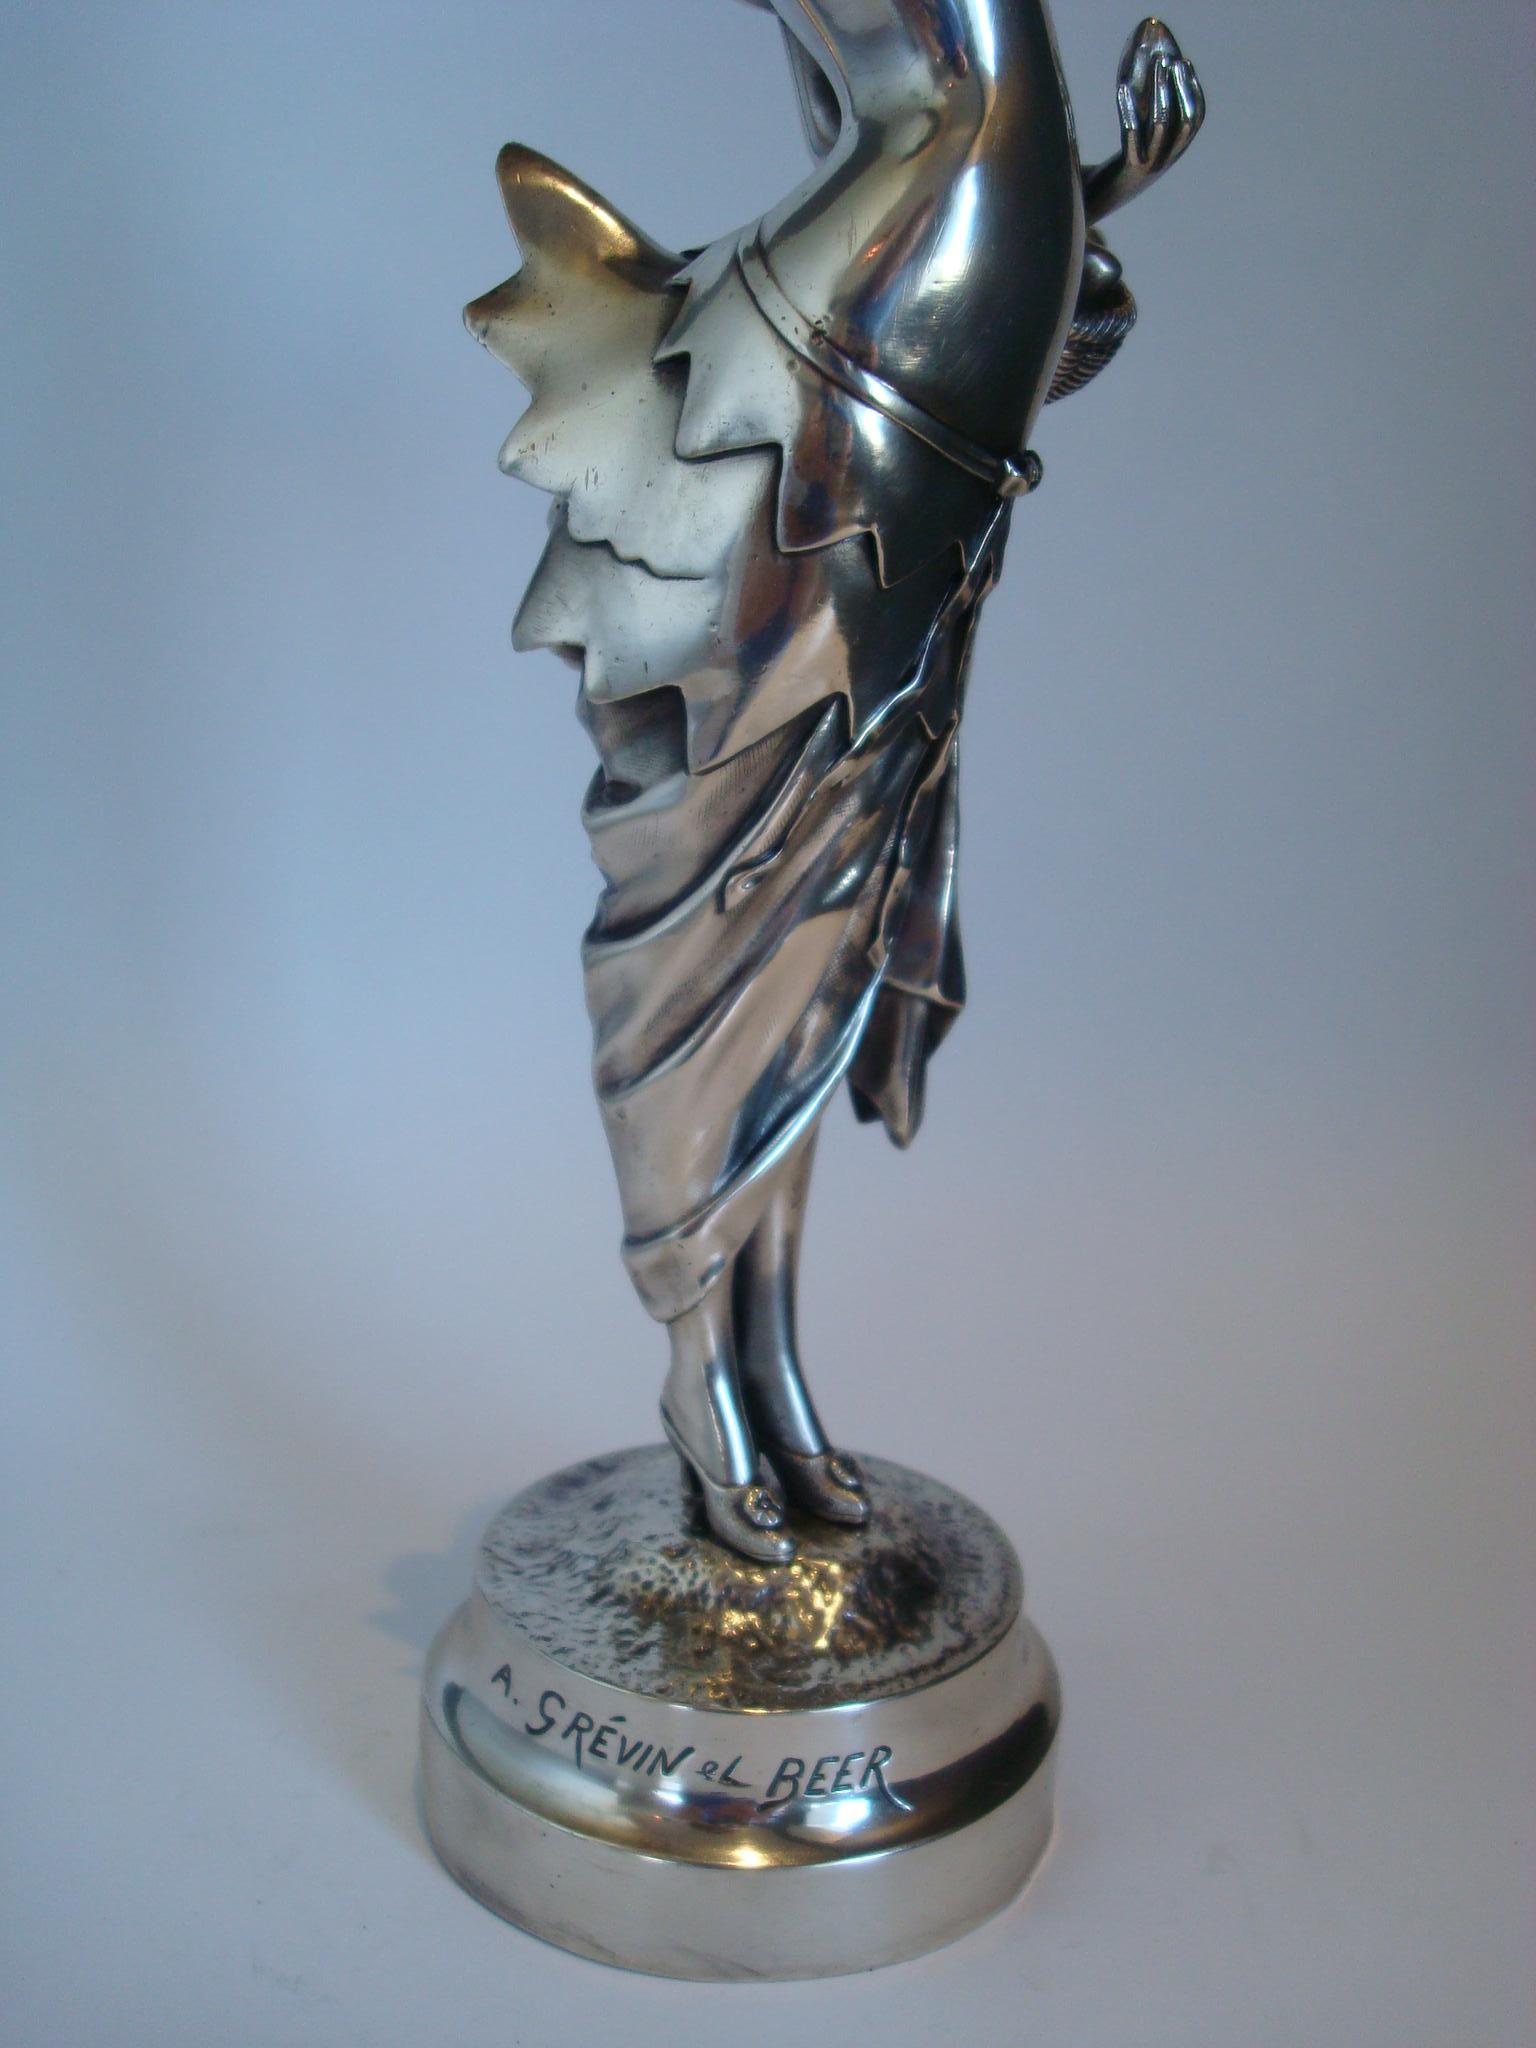 19th Century Art Nouveau Bronze Sculpture of a Female Hen by A. Grevin & F. Beer For Sale 3